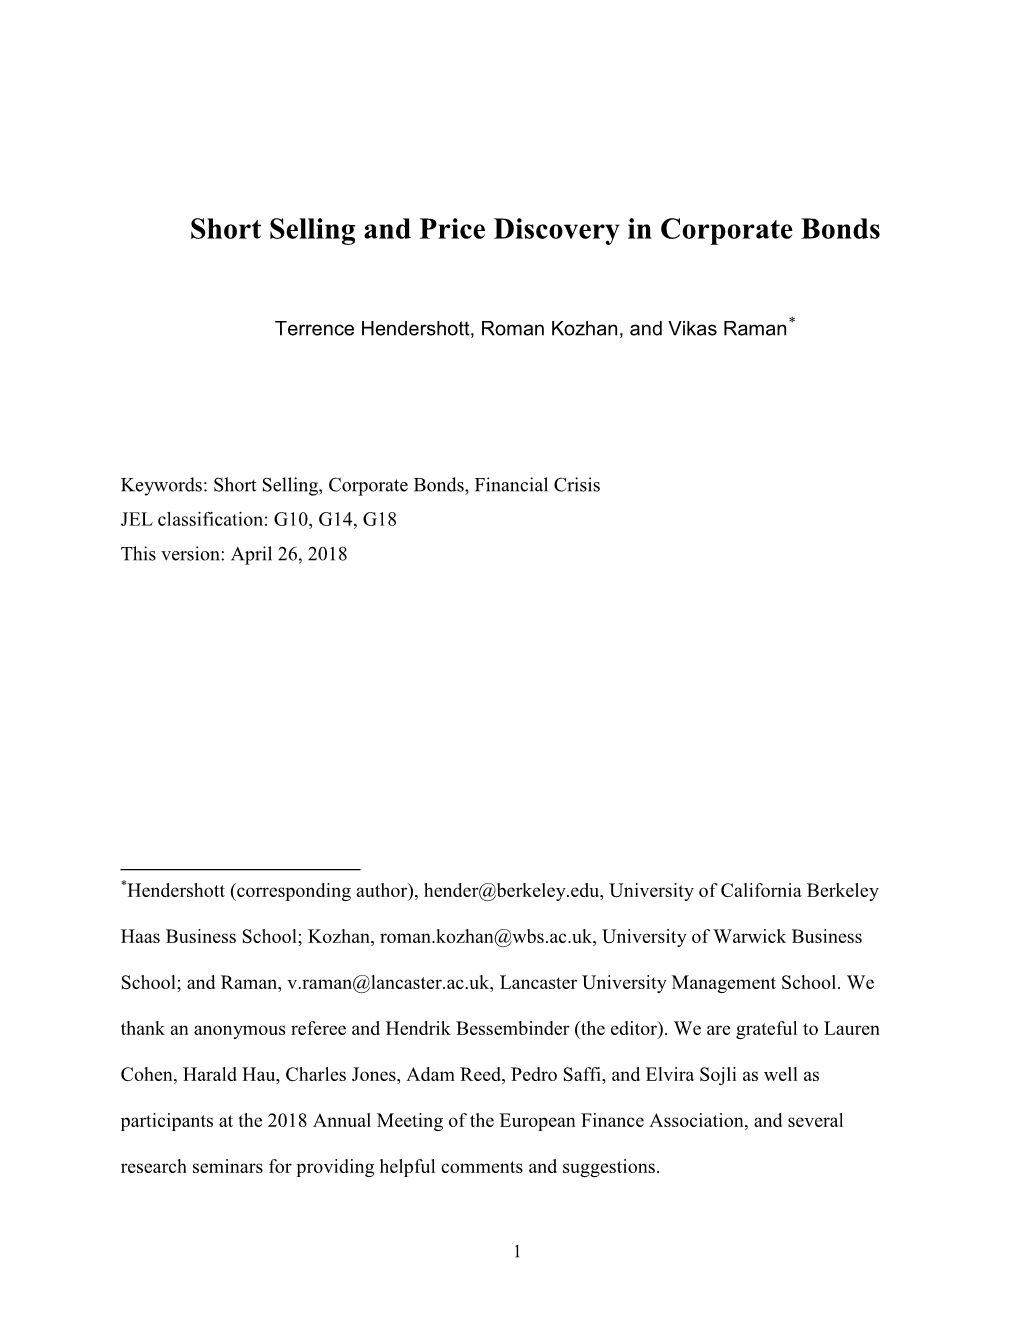 Short Selling and Price Discovery in Corporate Bonds